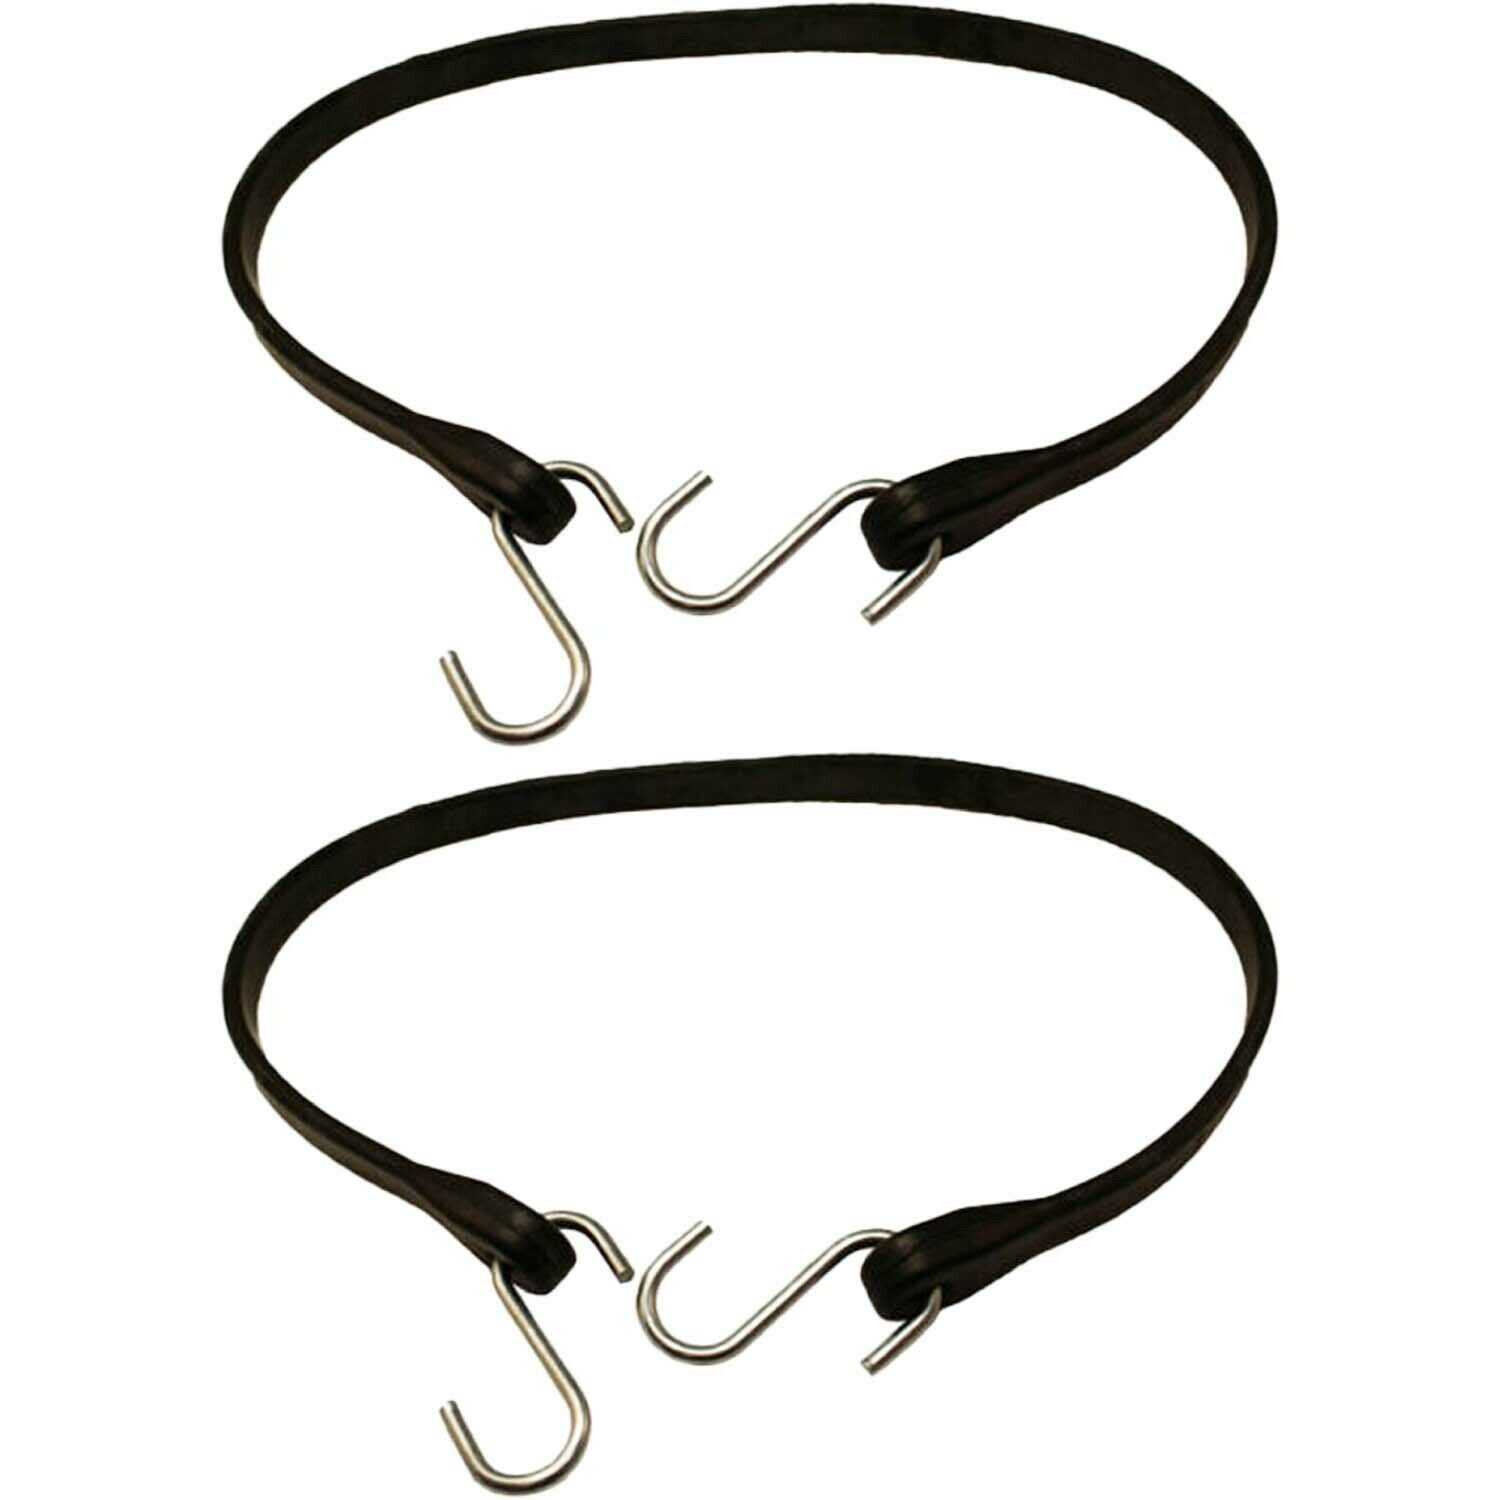 Peerless CC8409 9" EPDM Rubber Bungee Tarp Strap with Hooks Pack of 2